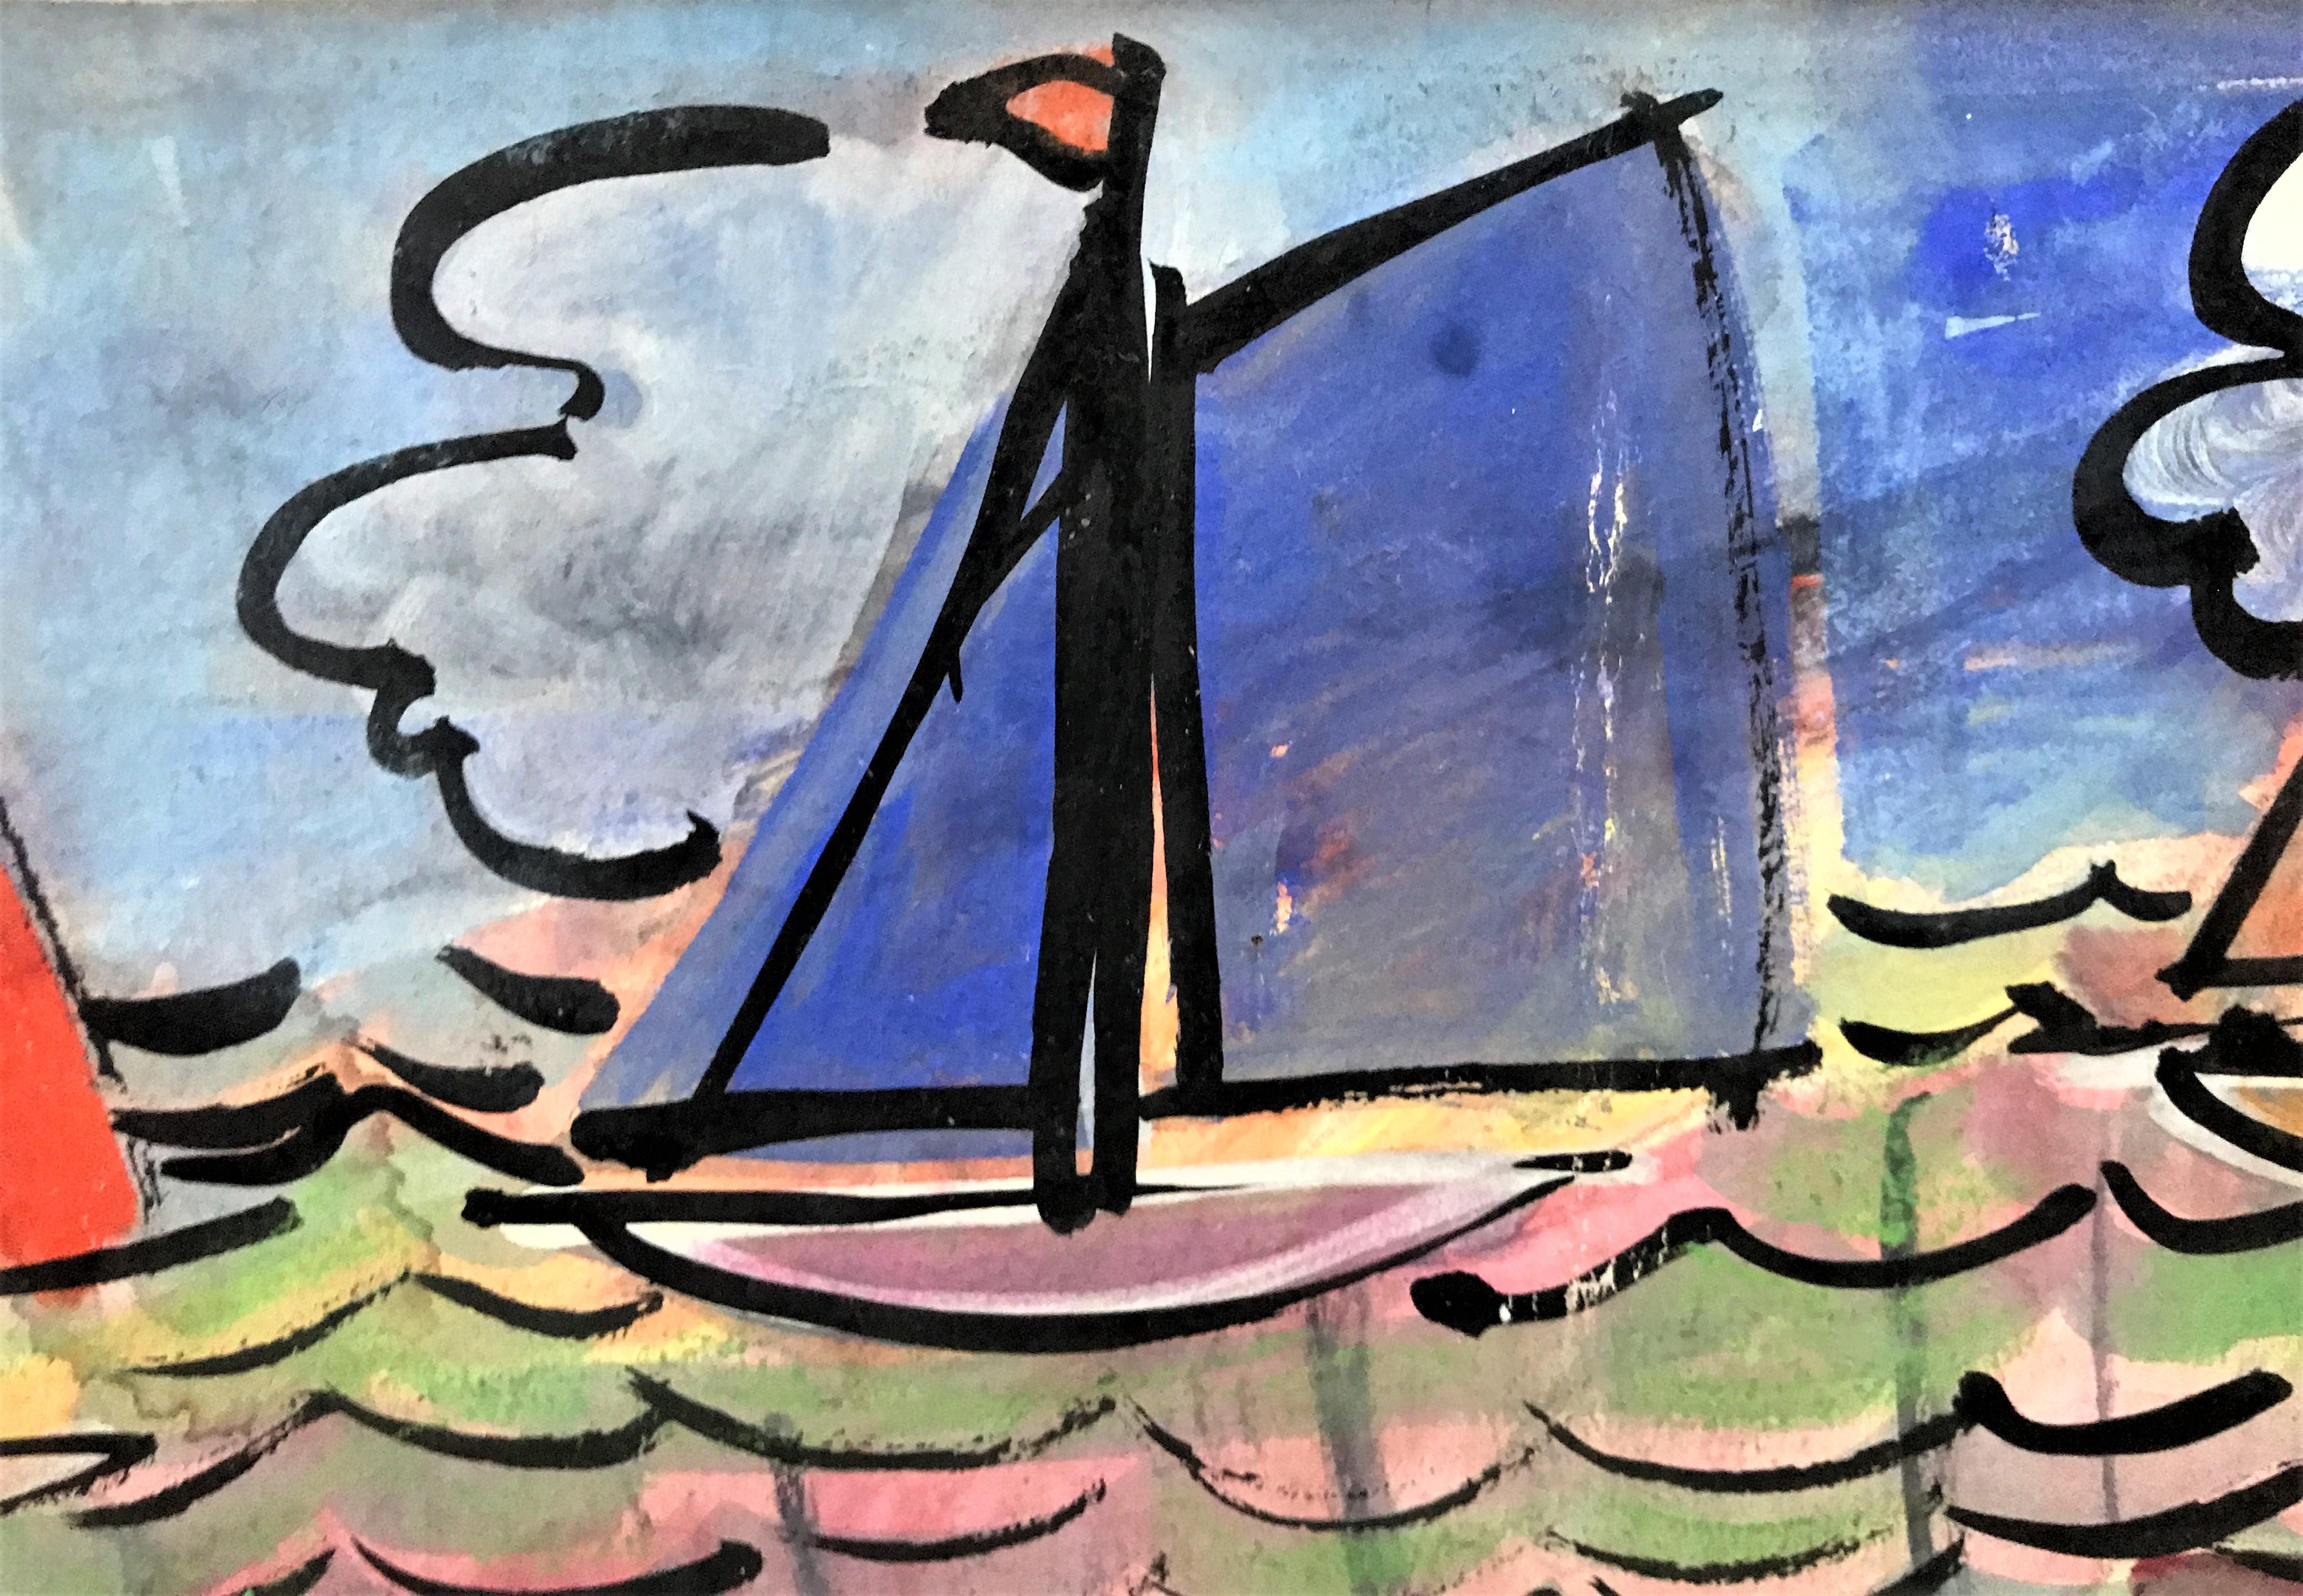 Sailboats at Sea, 20th Century French School, colourful original oil on canvas - Brown Landscape Painting by Unknown